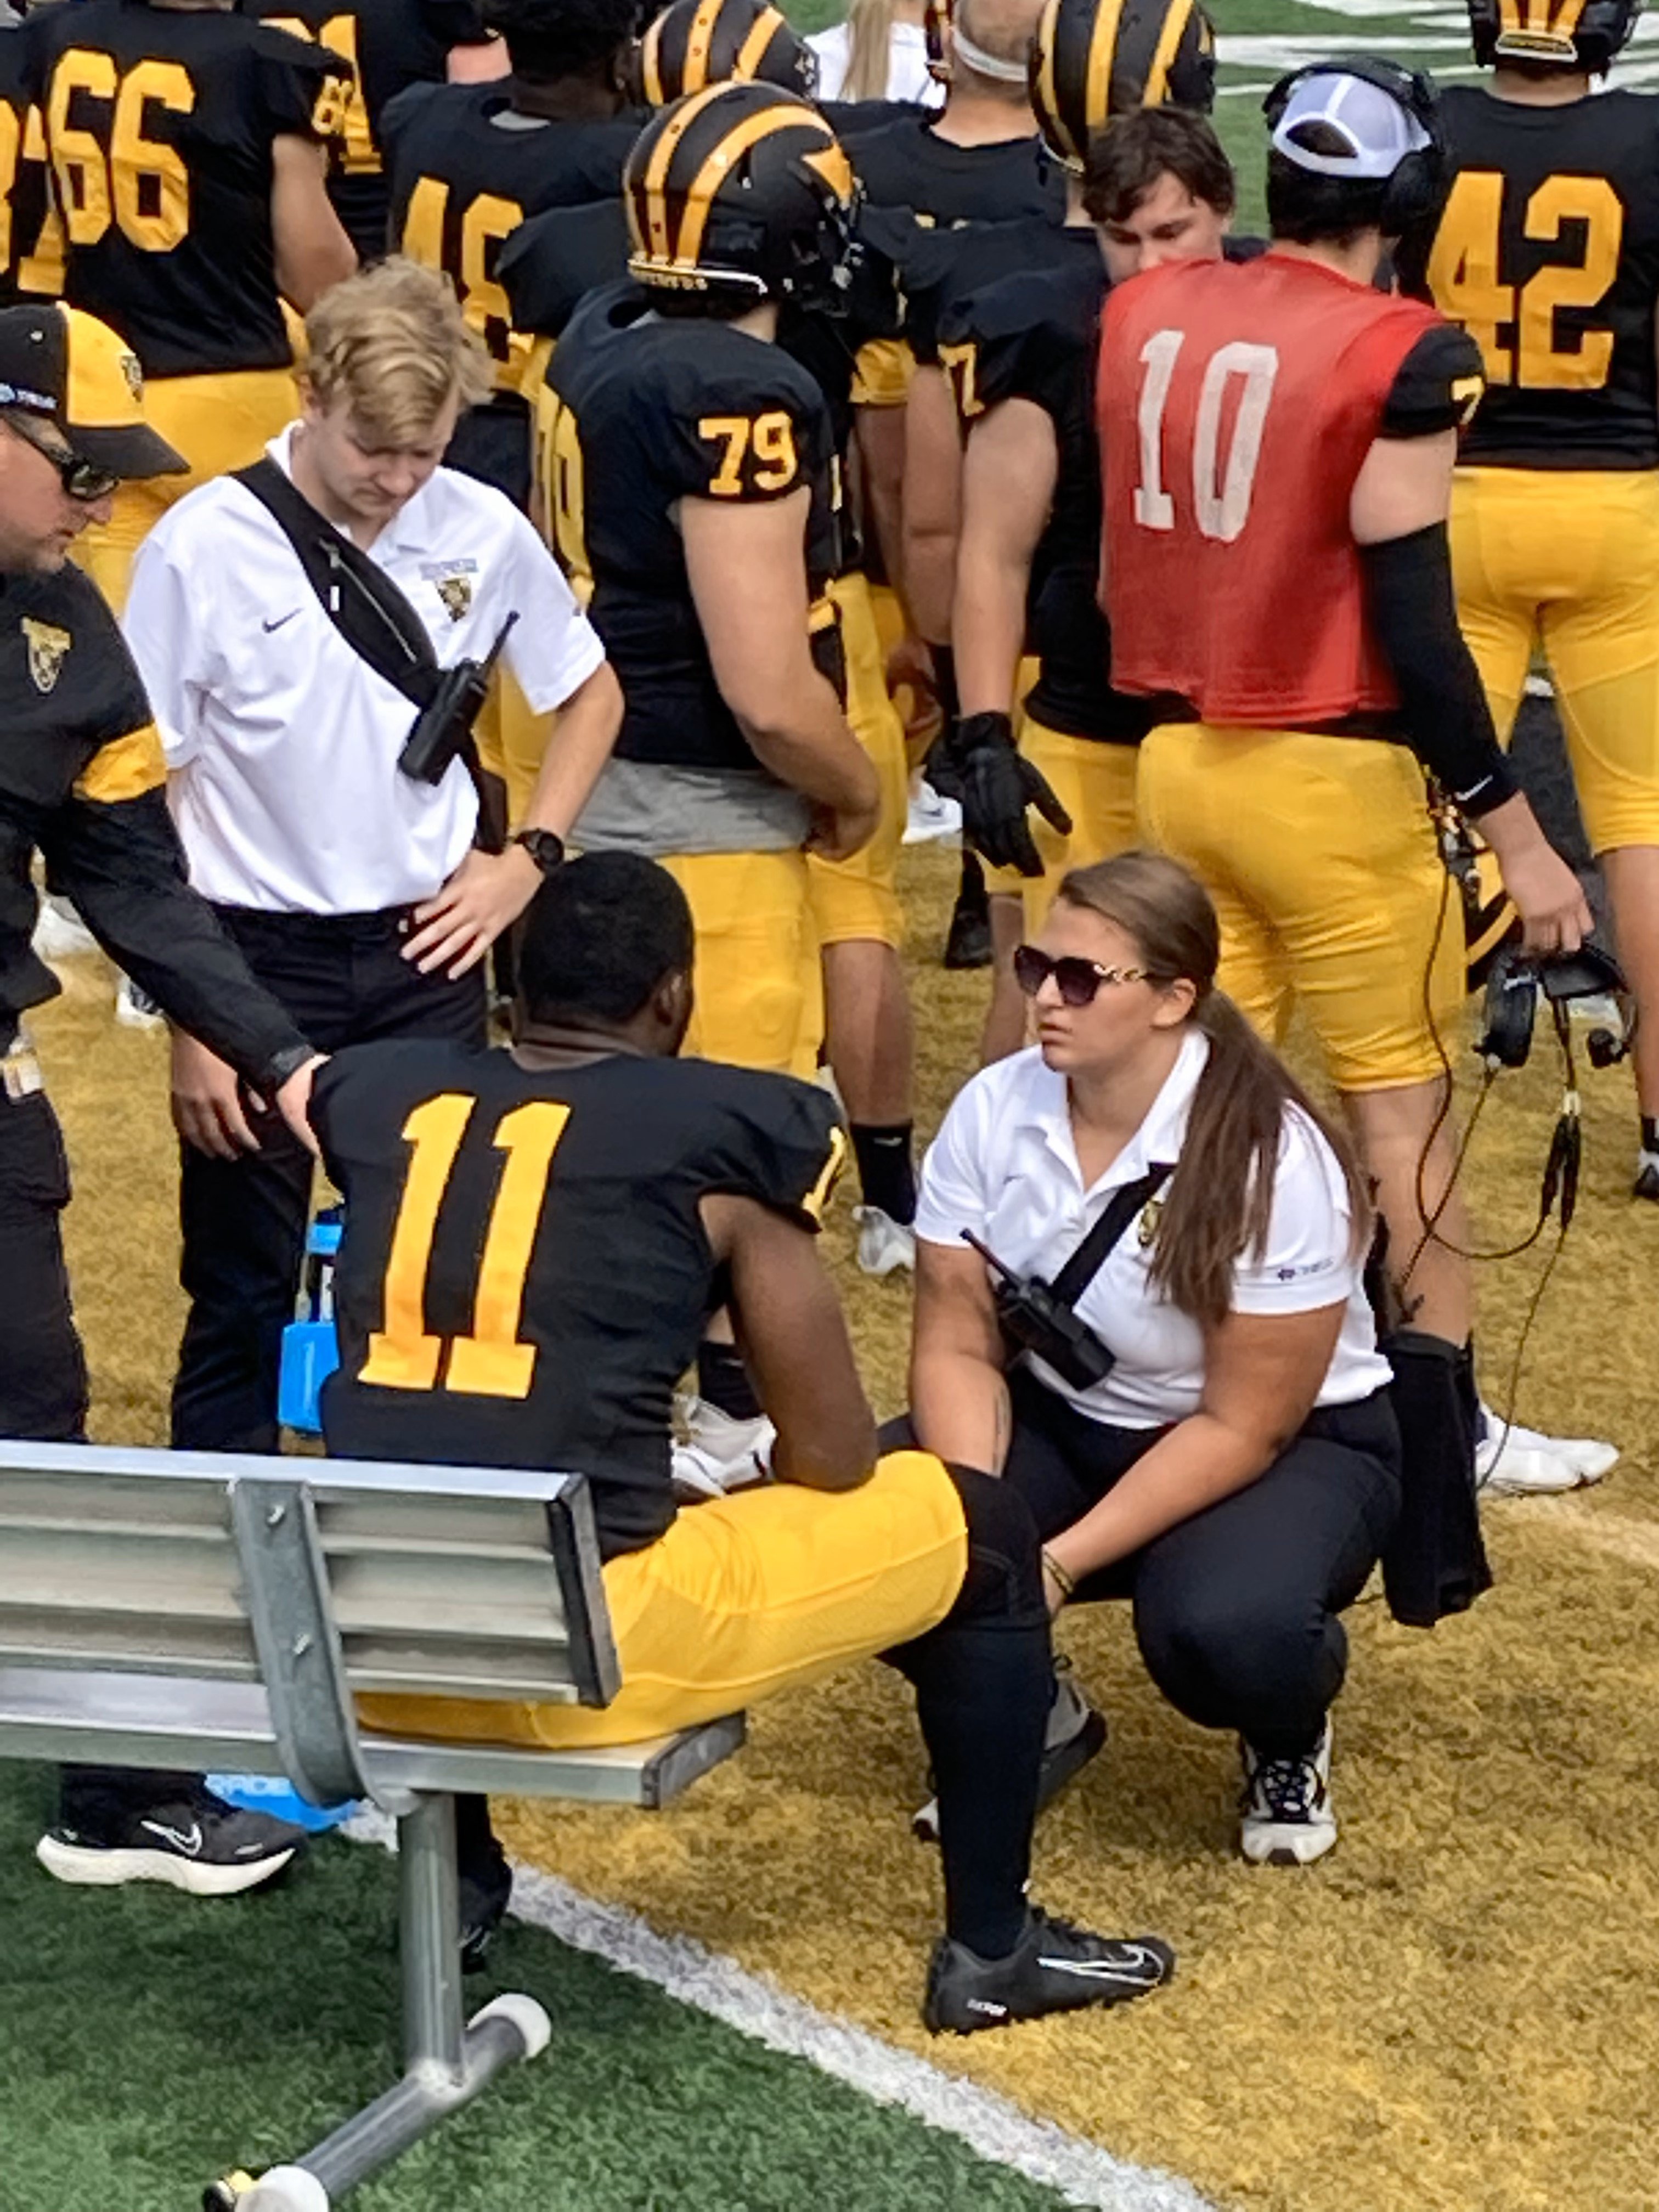 Afemale athletic trainer works on the sideline of a football field with football players in black and gold uniforms.